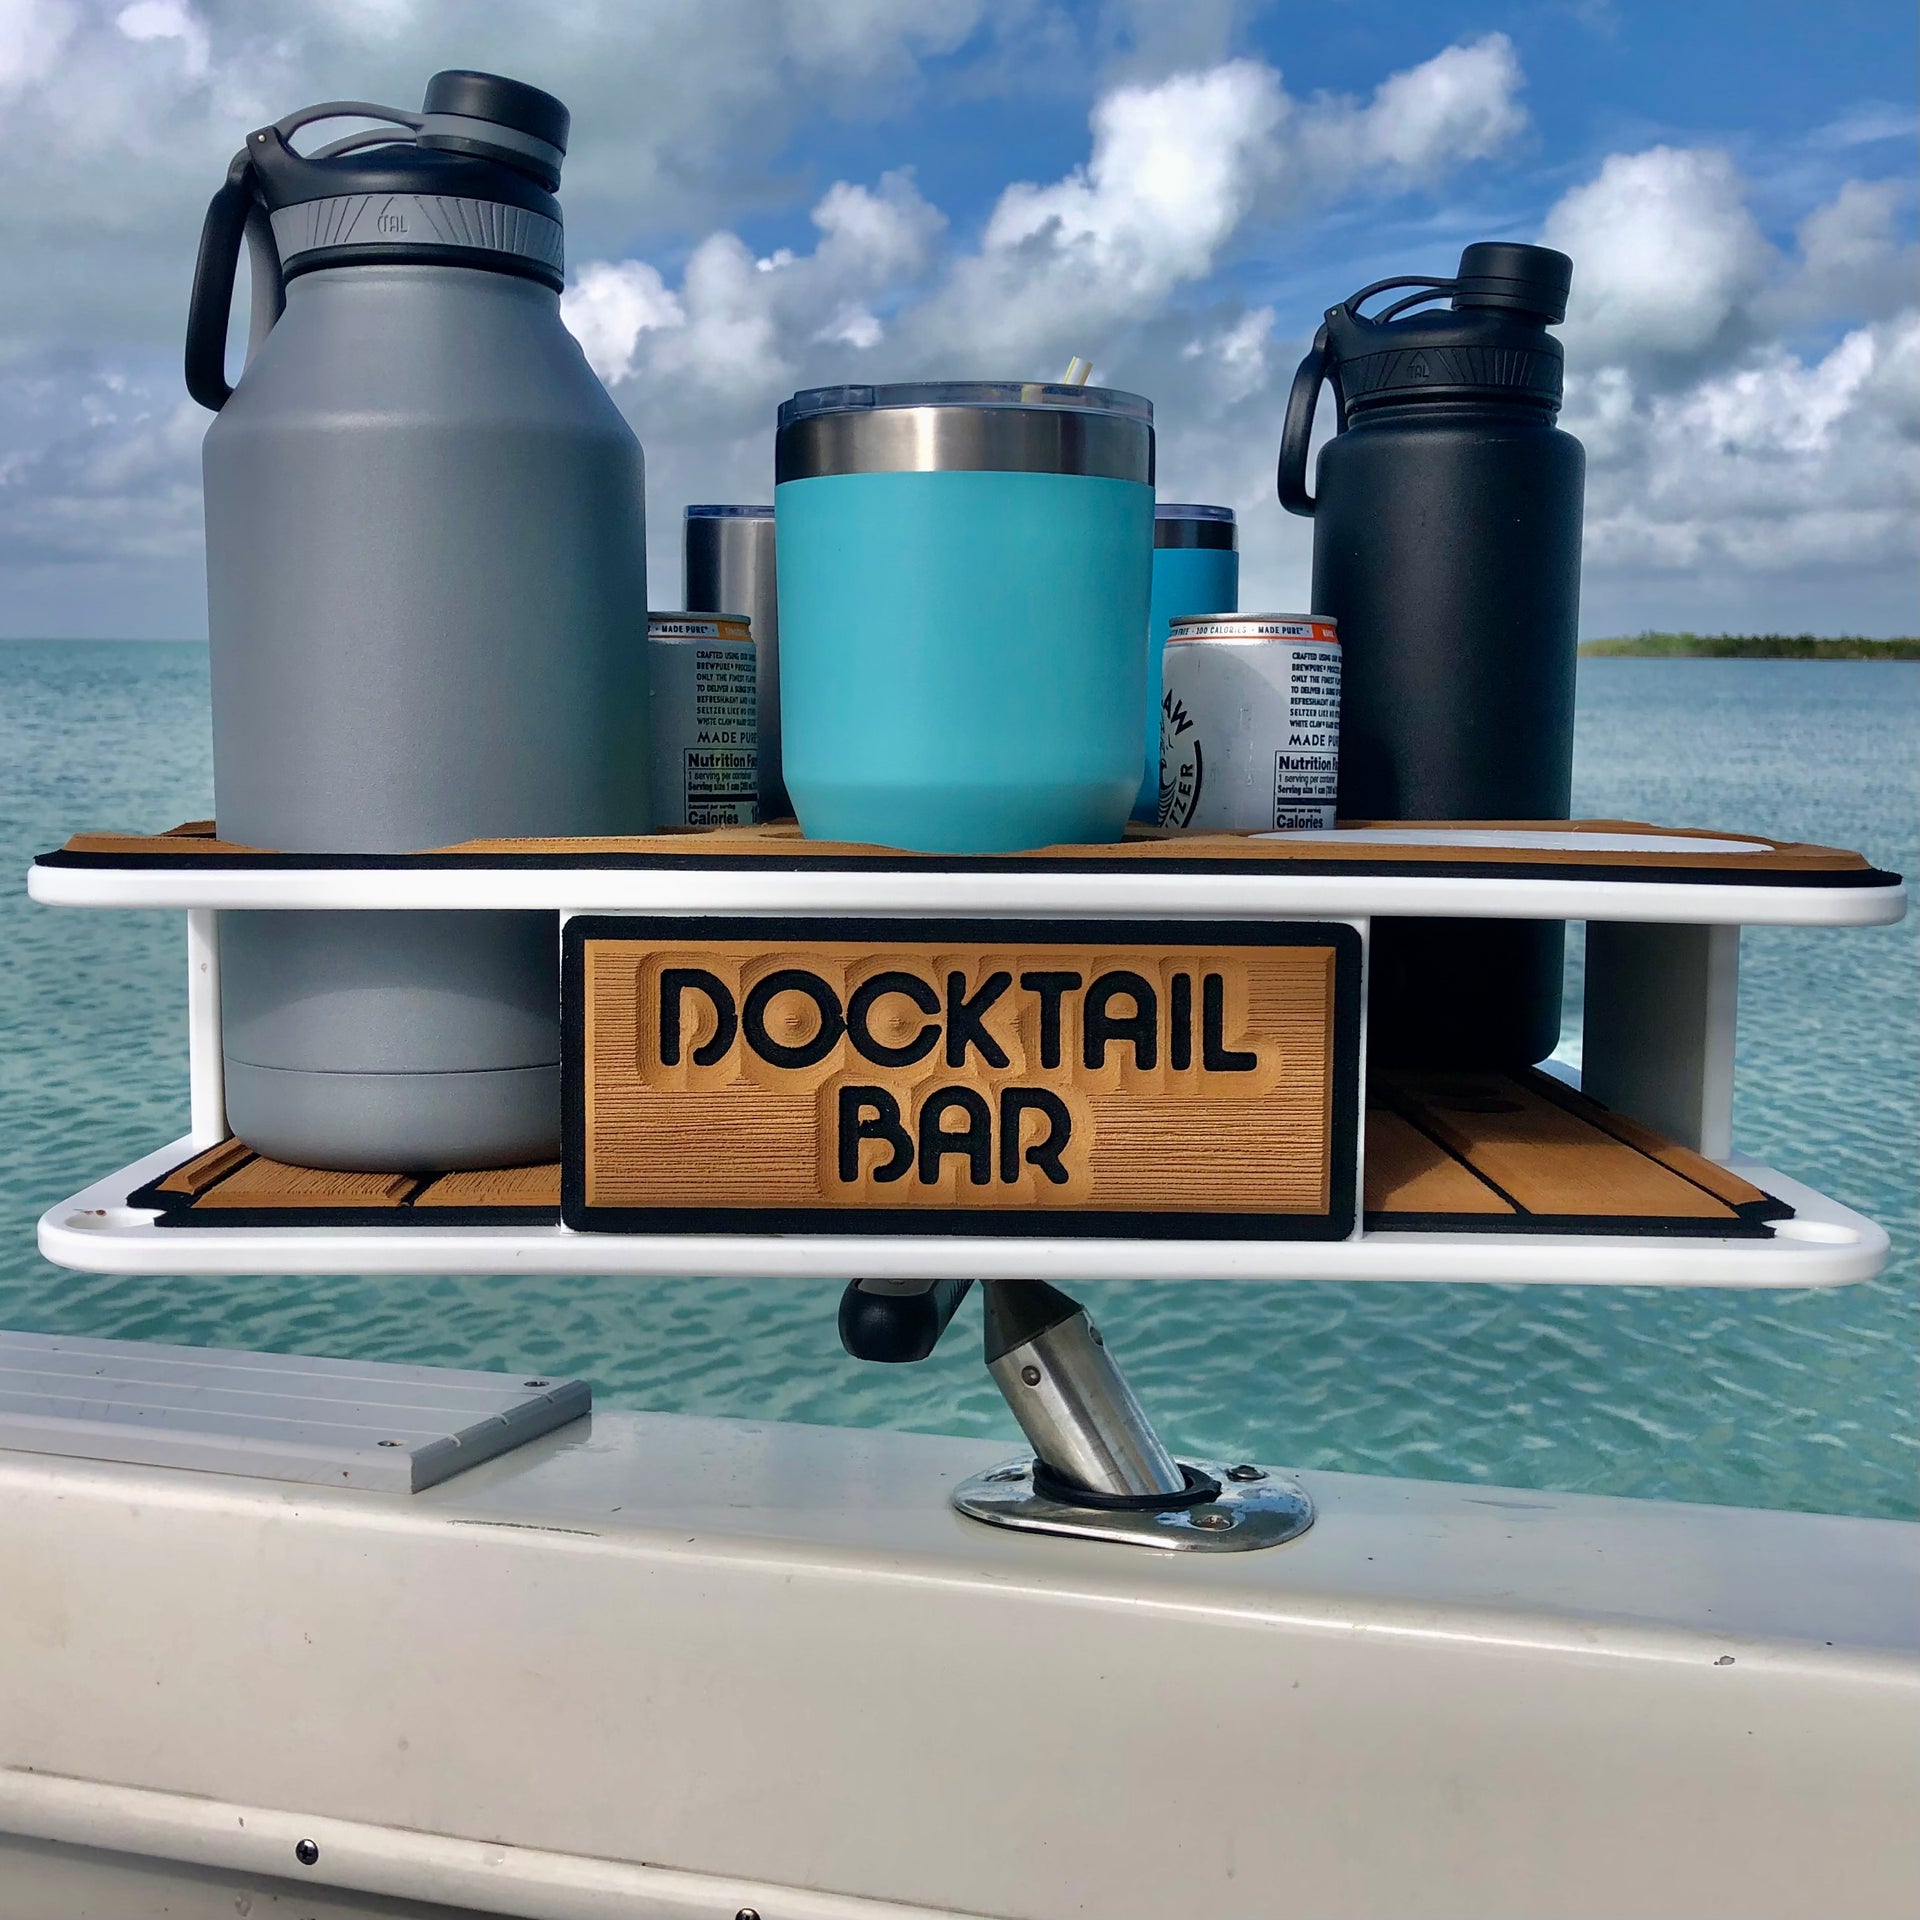 Docktail Boat Table Caddy with Adjustable Rod Holder Mount - Choose Your  Color